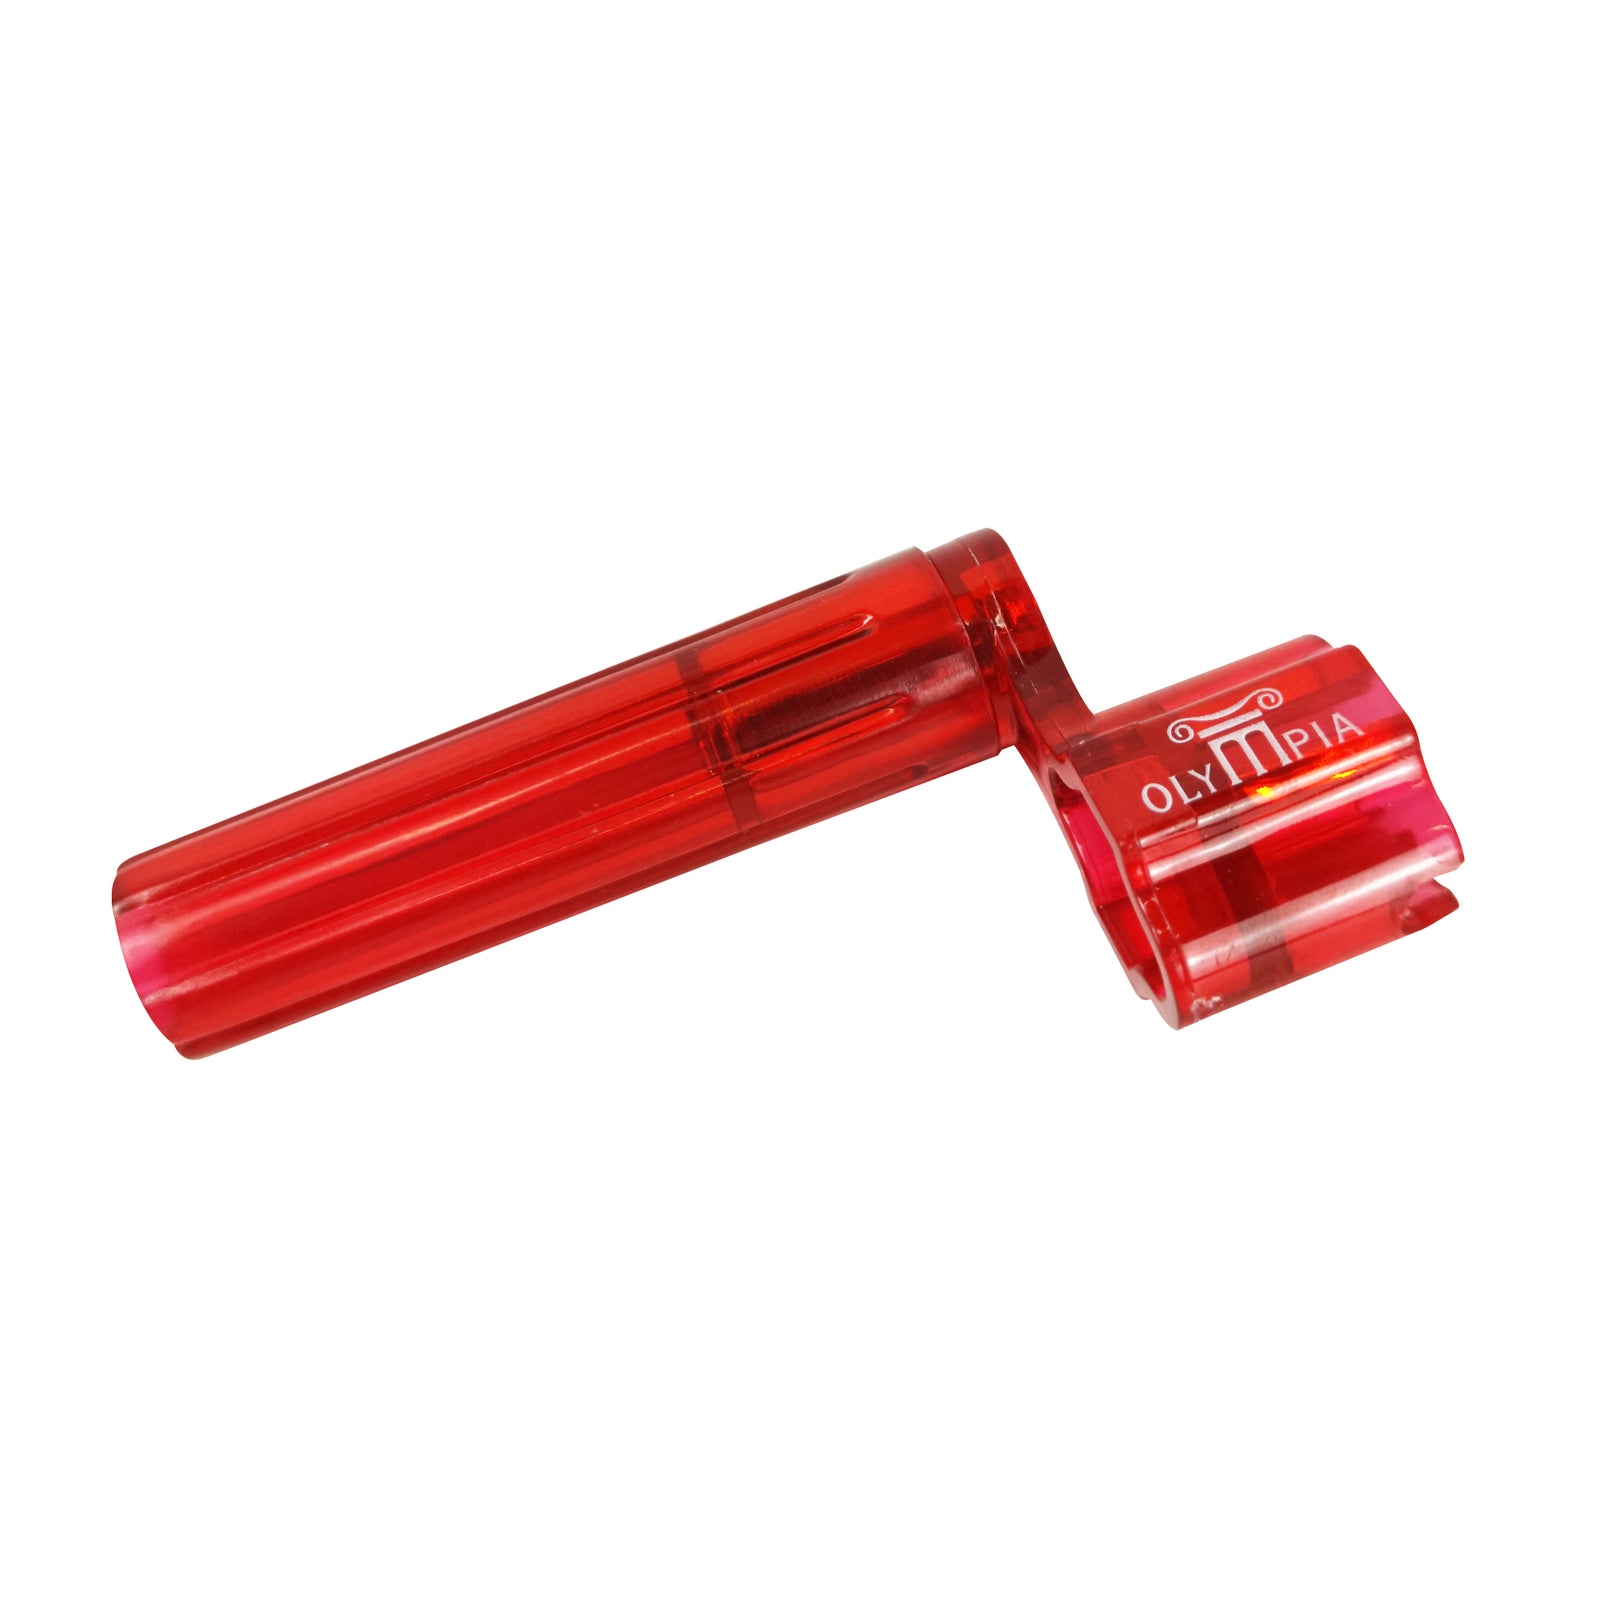 Olympia Peg Winder PW70 (#702) Red